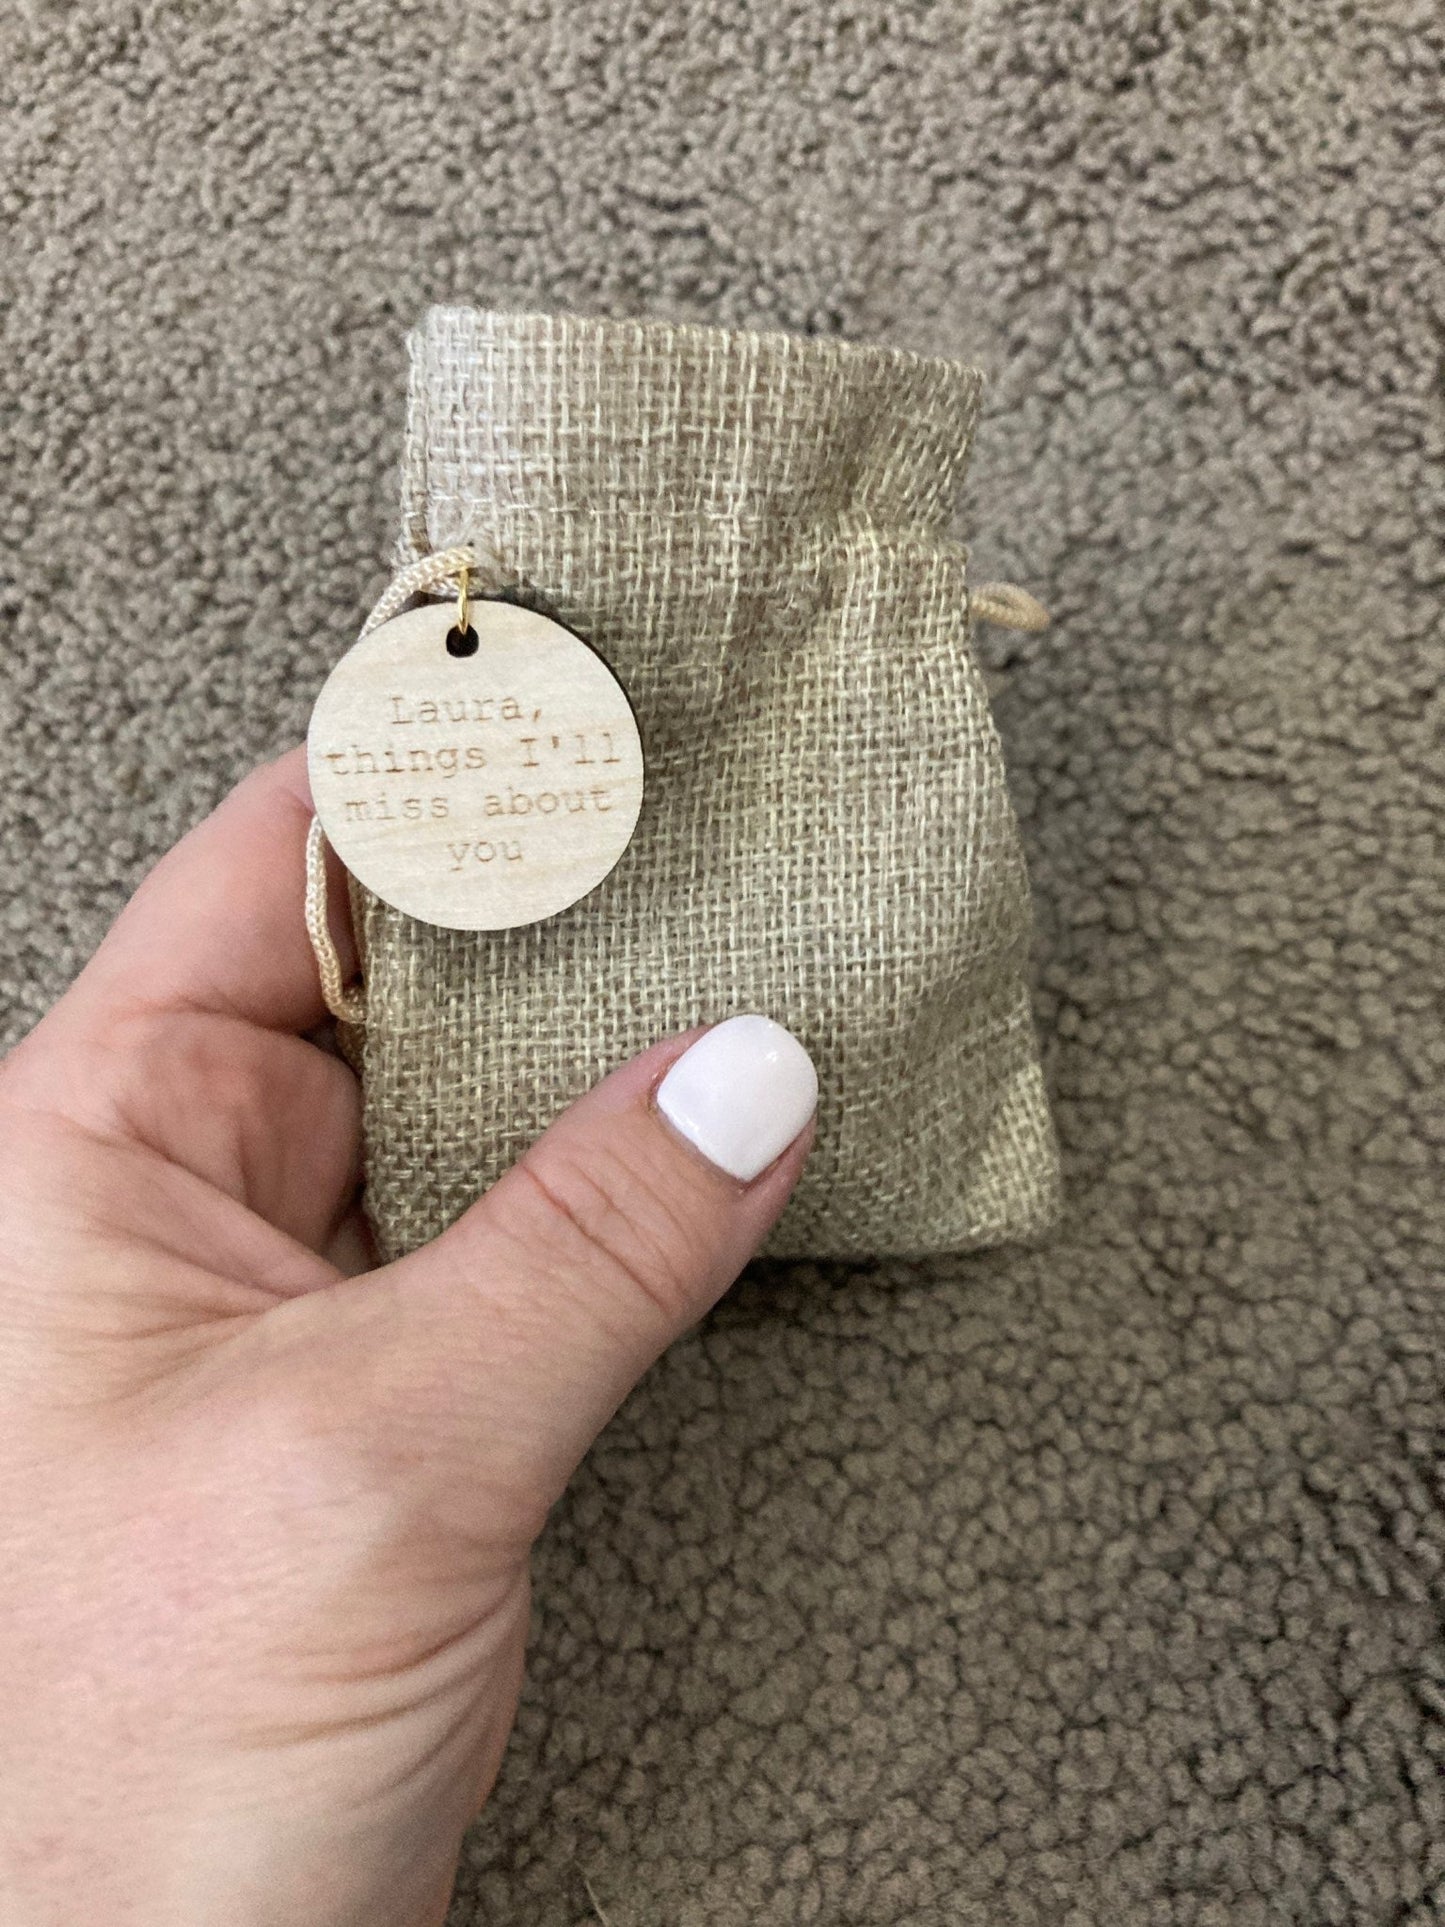 Inner Calm Coins, Pocket Anxiety Techniques, Mindfulness Gift - CherryGroveCraft